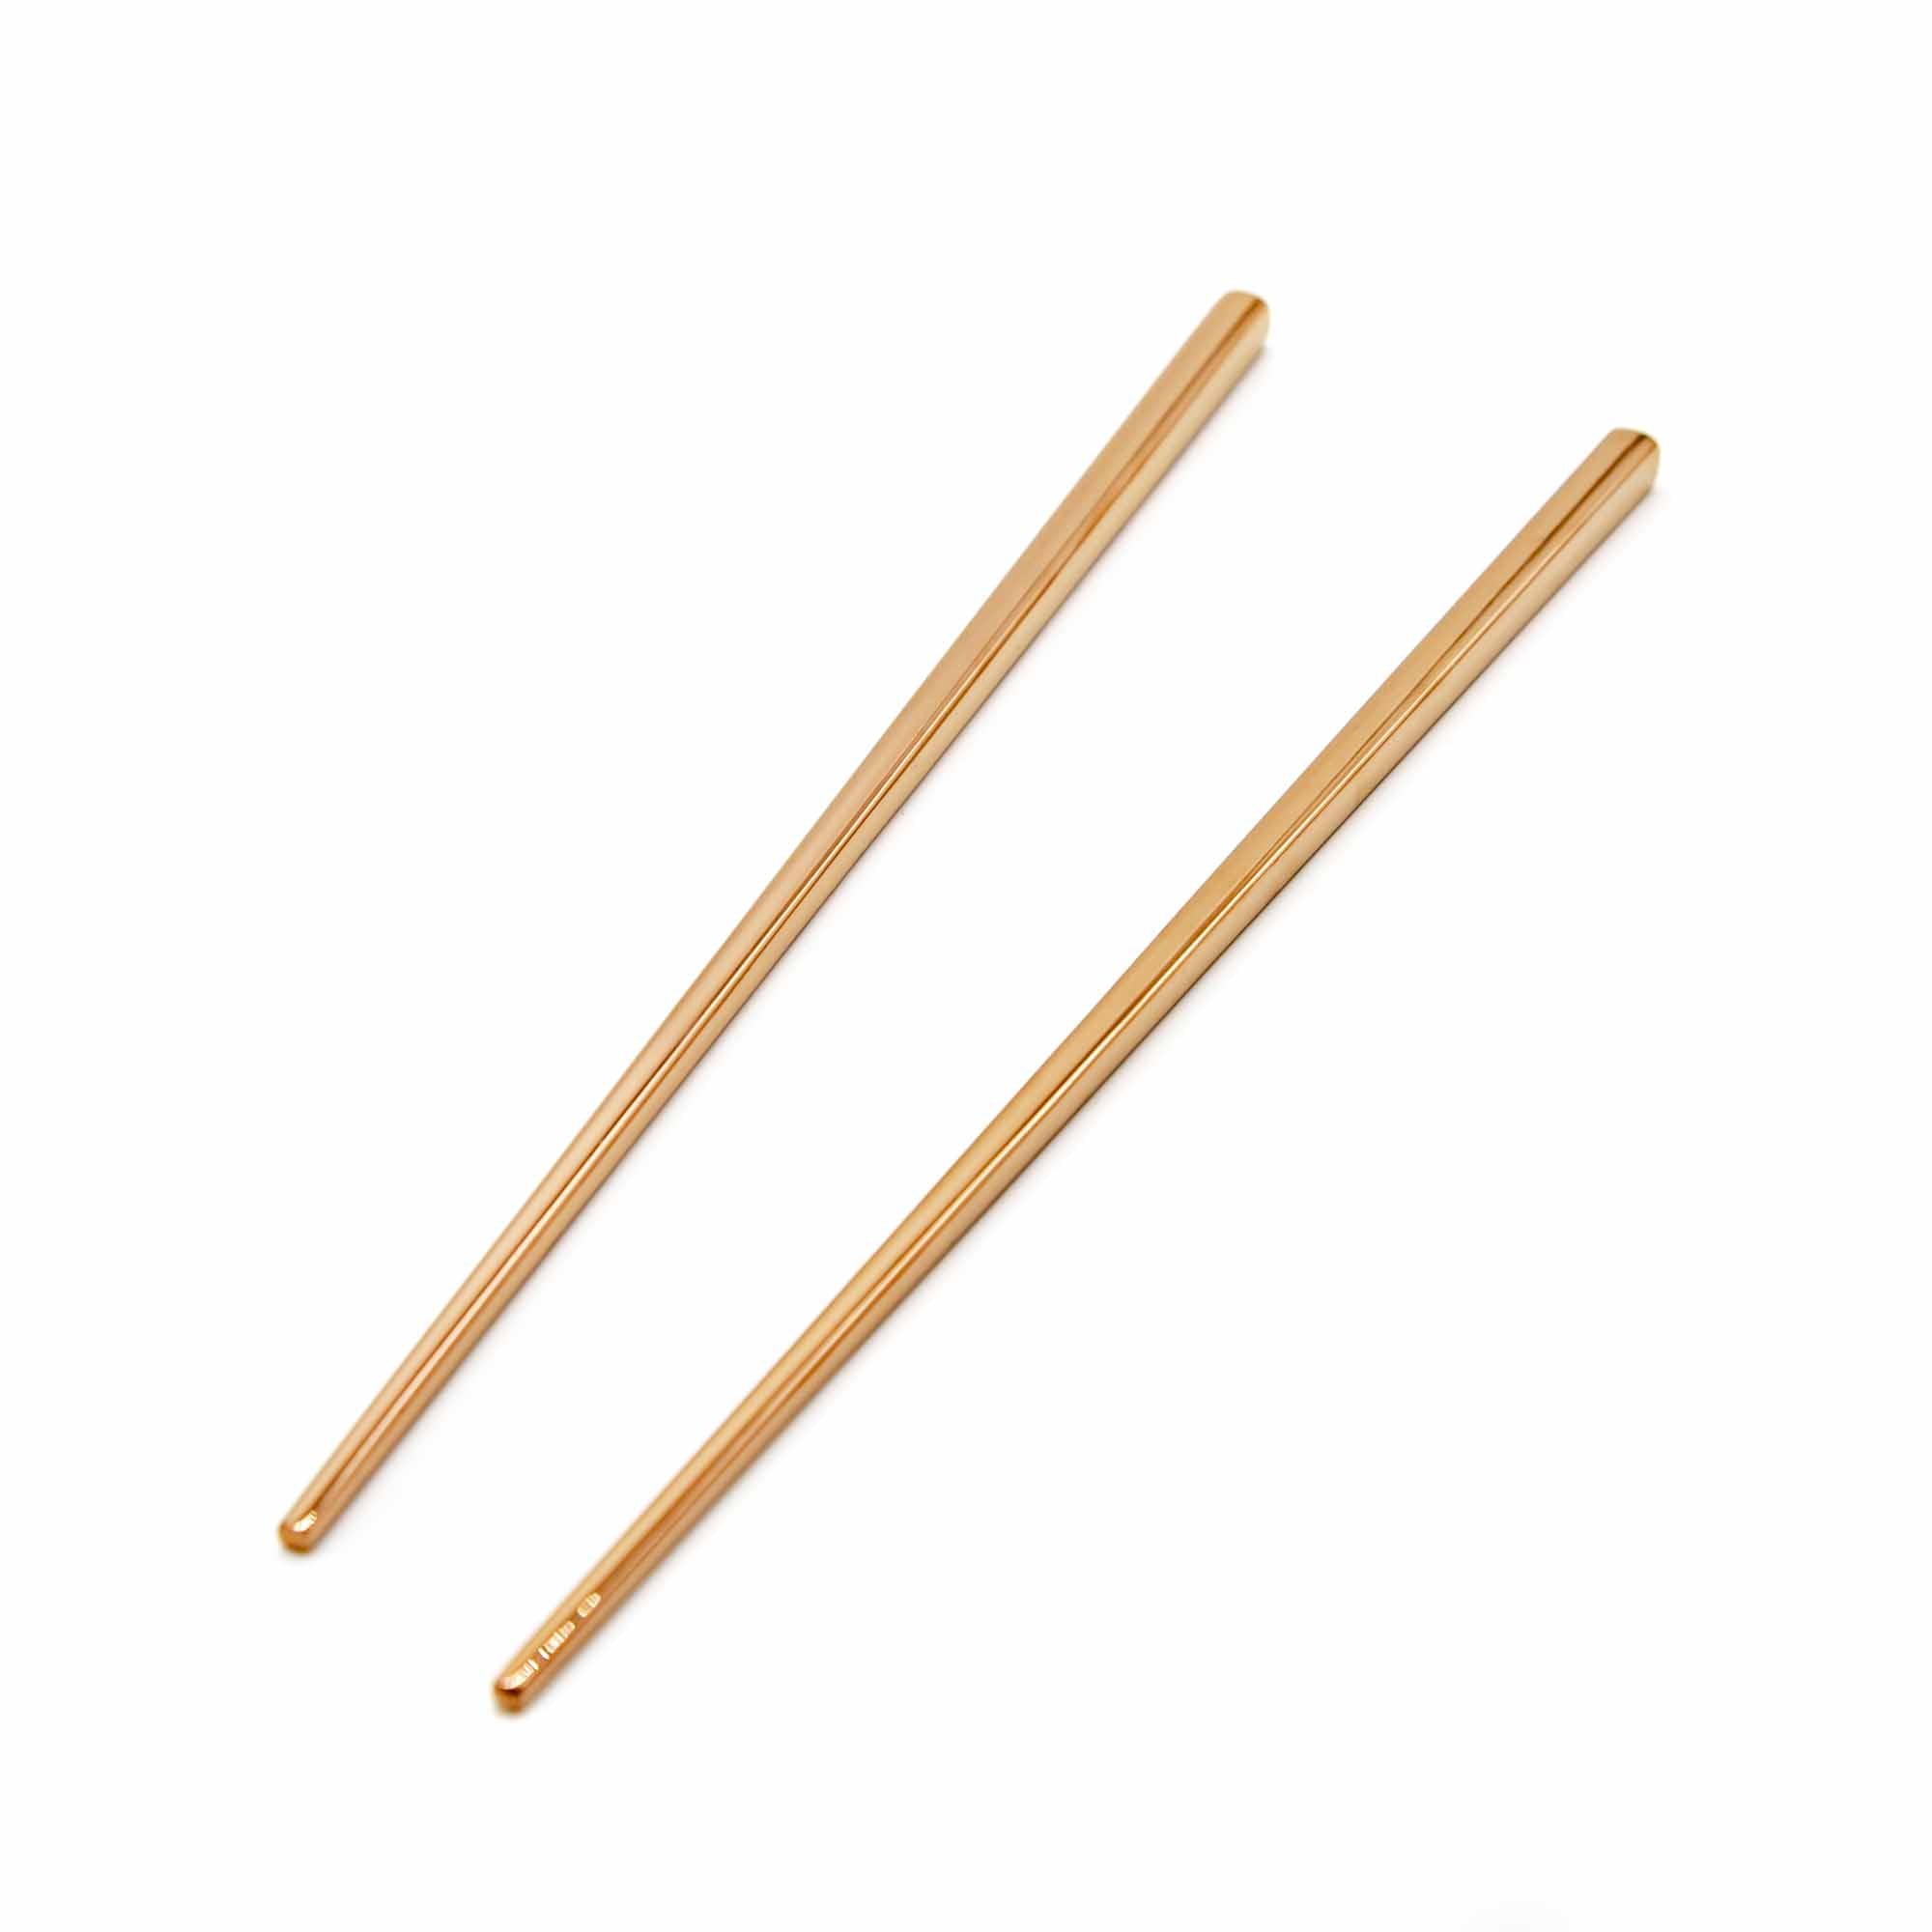 Stainless Steel Chopsticks - Mortise And Tenon